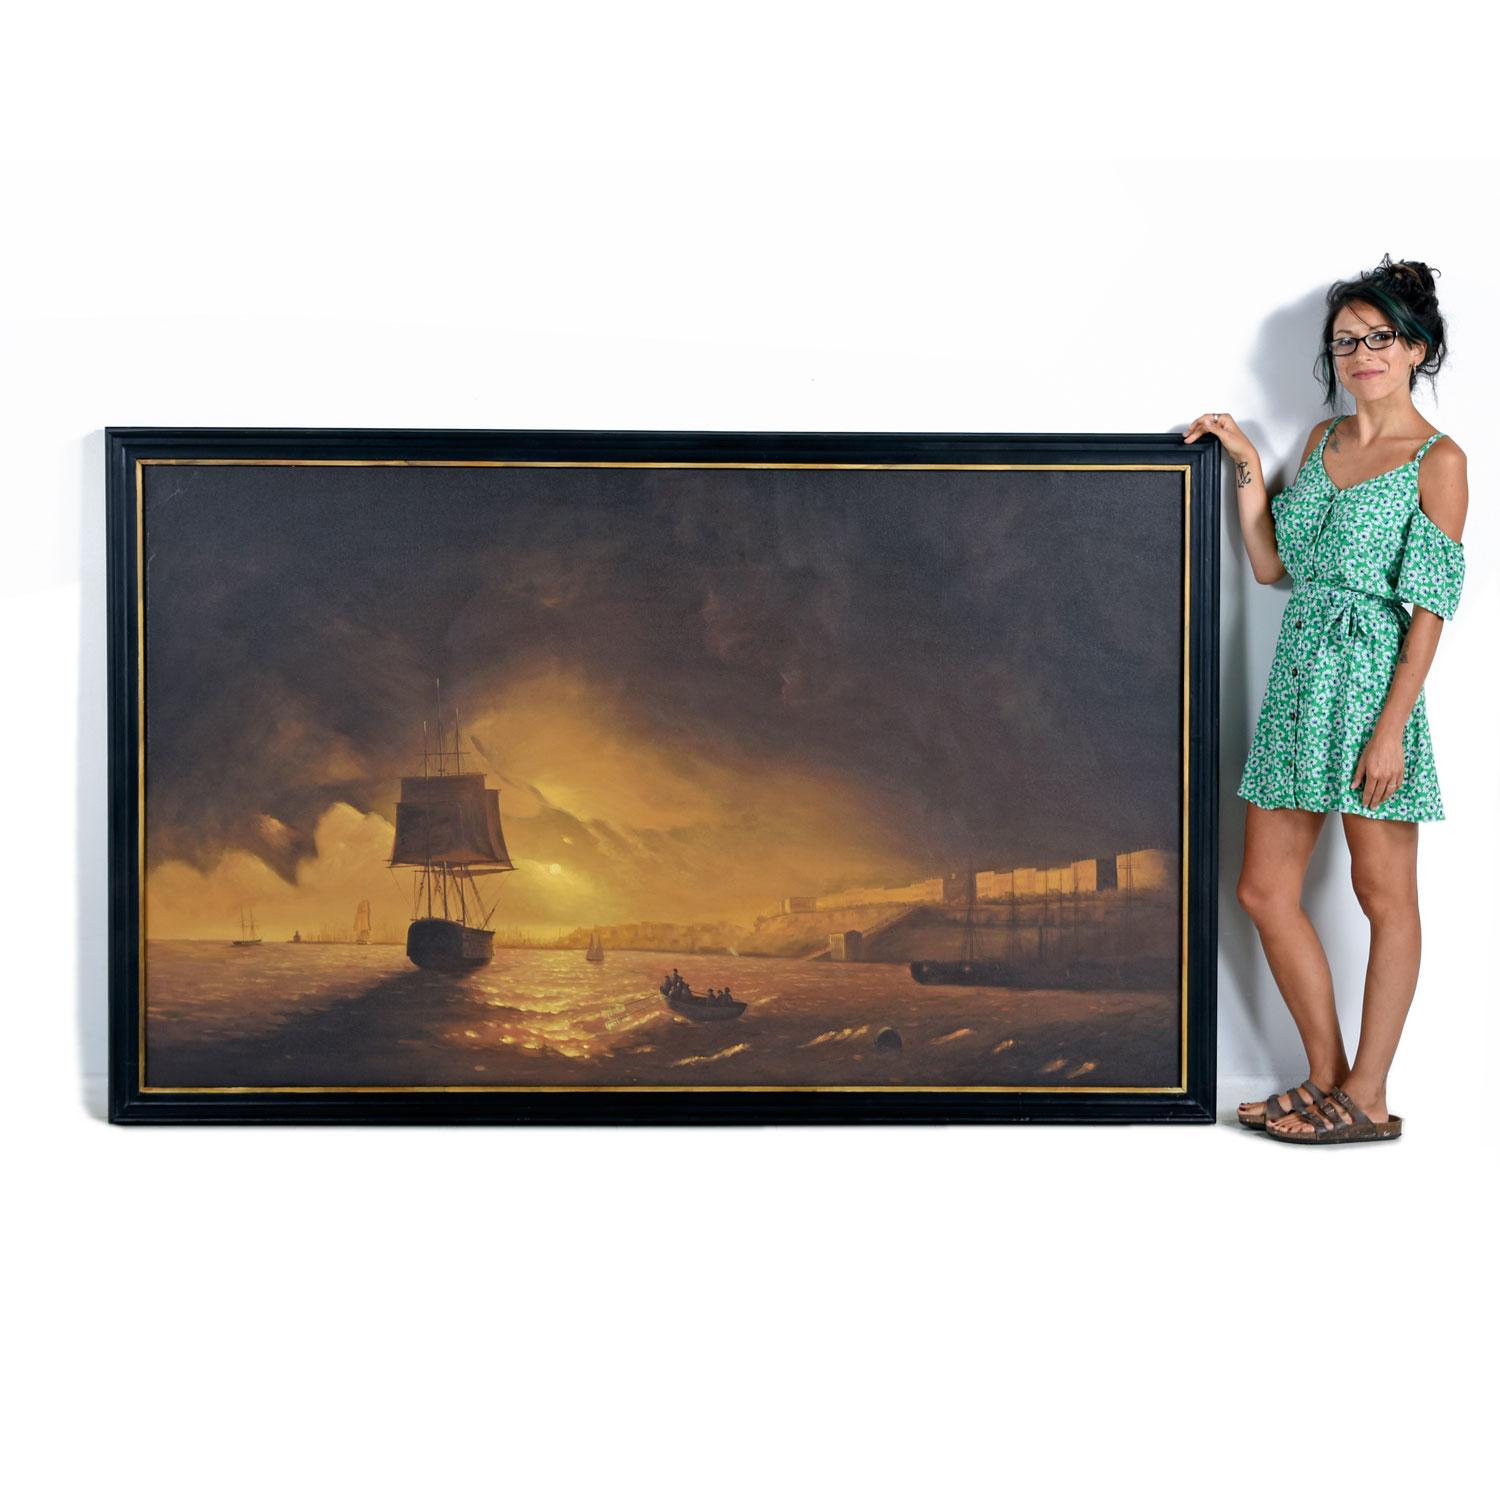 This phenomenal maritime painting spans nearly seven feet in length! Easily one of the largest paintings we’ve had the pleasure to present. The large format painting captivates the viewer as it’s sheer size and foreboding aura envelope the viewer.